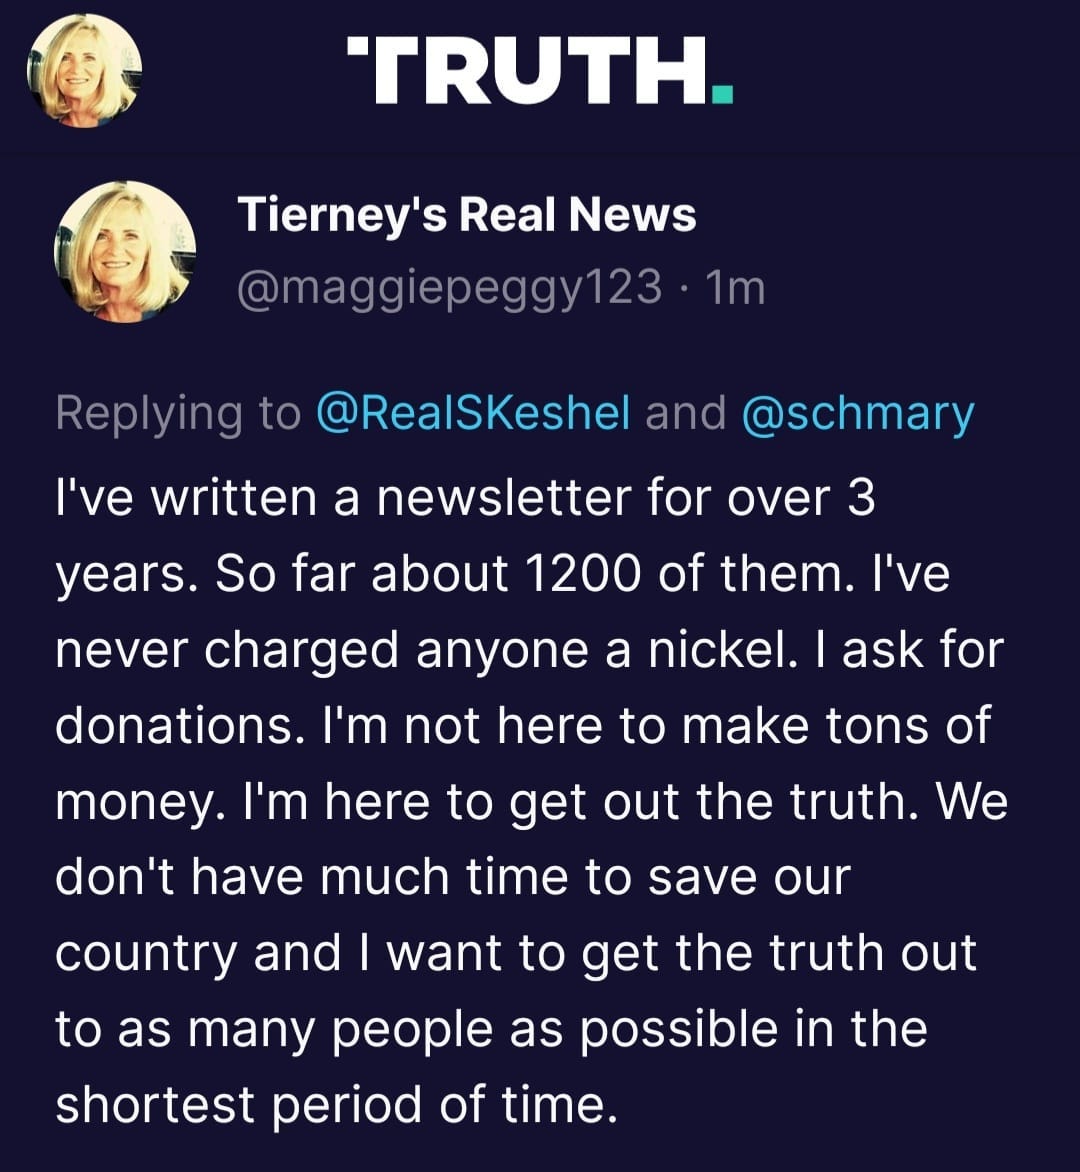 May be a Twitter screenshot of 2 people and text that says 'TRUTH. Tierney's Real News @maggiepeggy123 1m Replying to @RealSKeshel and @schmary ask for I've written a newsletter for over 3 years. So far about 1200 of them. I've never charged anyone a nickel. donations. I'm not here to make tons of money. I'm here to get out the truth. We don't have much time to save our country and I want to get the truth out to as many people as possible in the shortest period of time.'